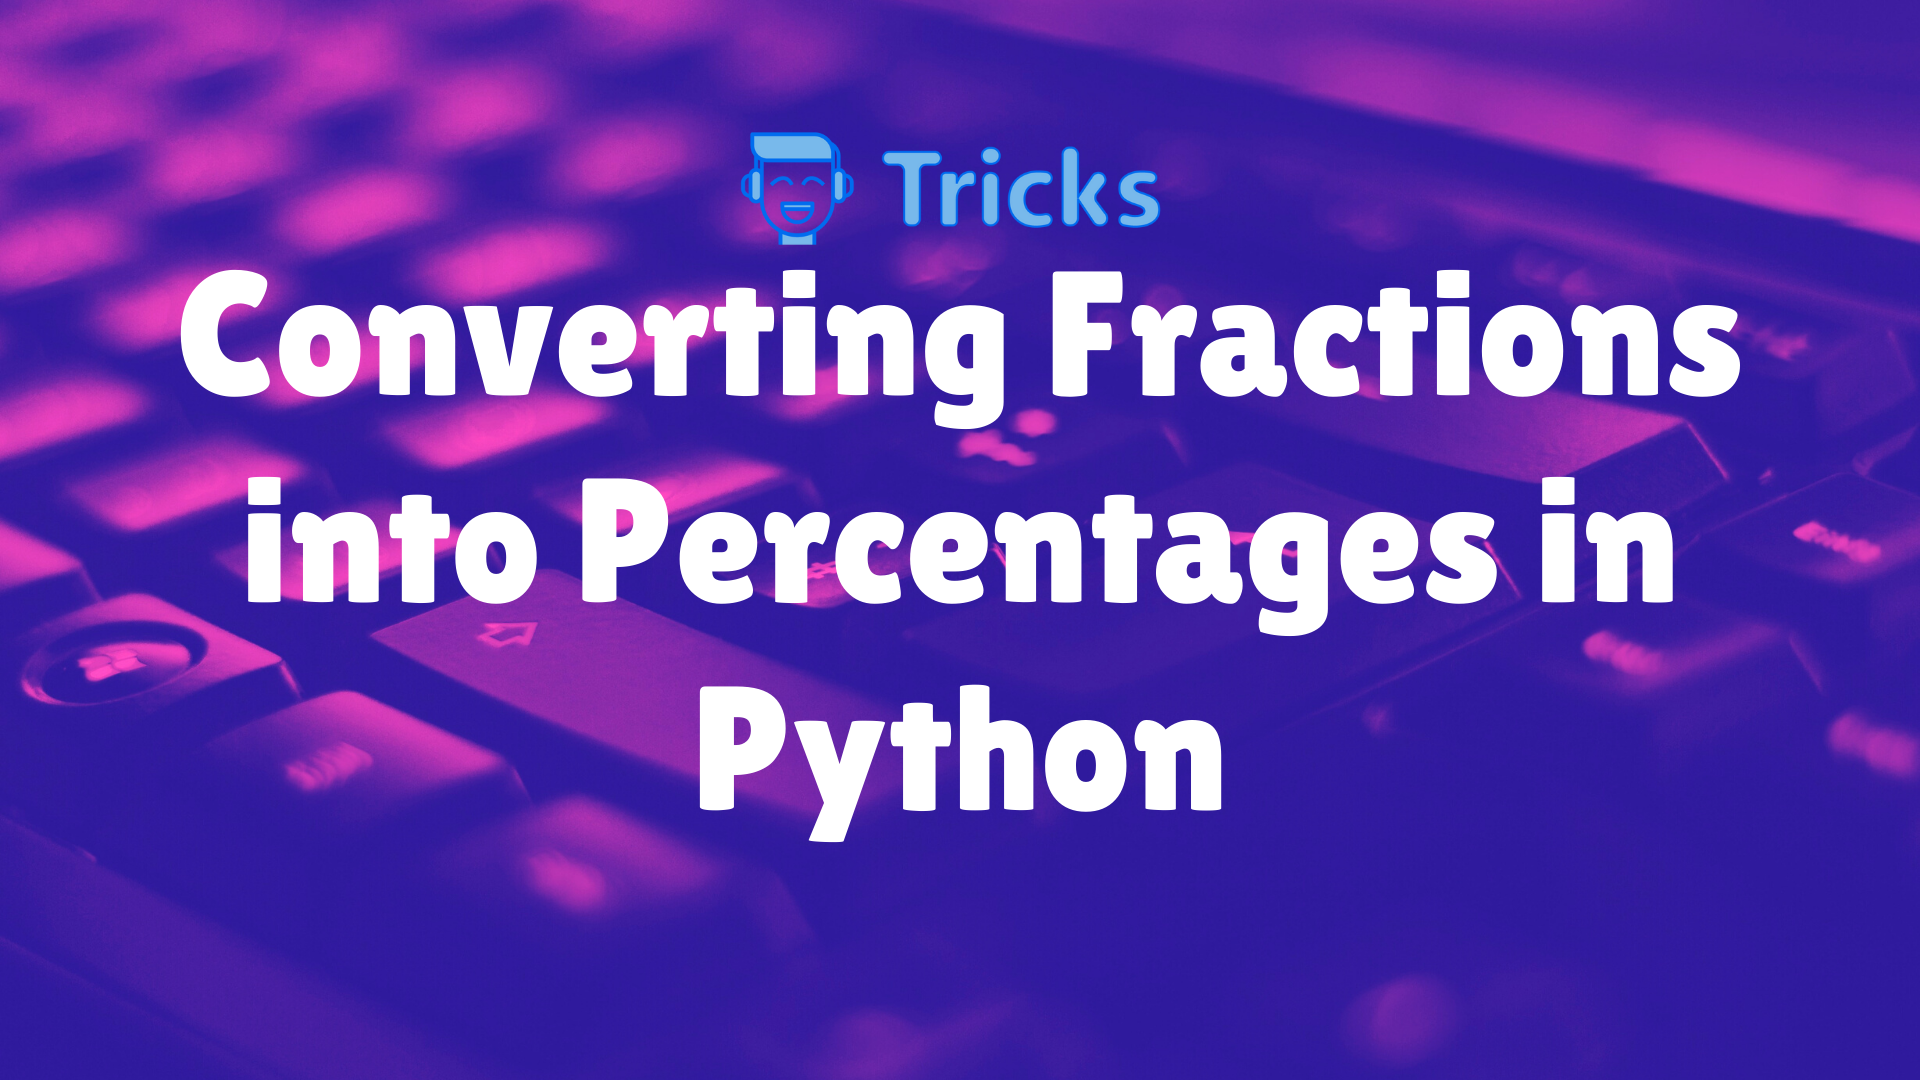 Converting Fractions into Percentages in Python